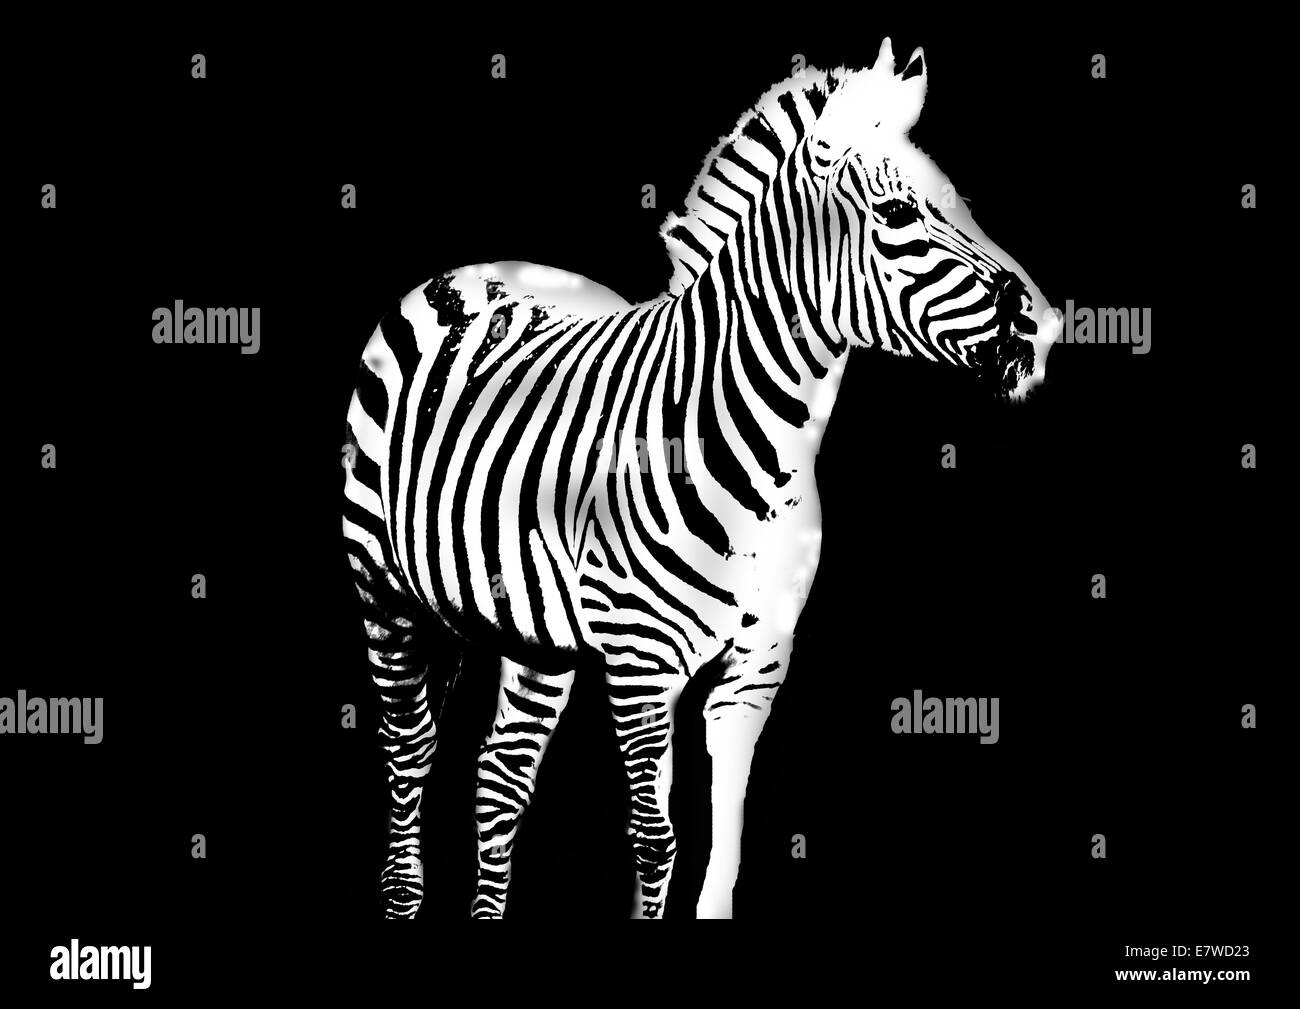 Zebra in high contrast Black and White on black background Stock Photo